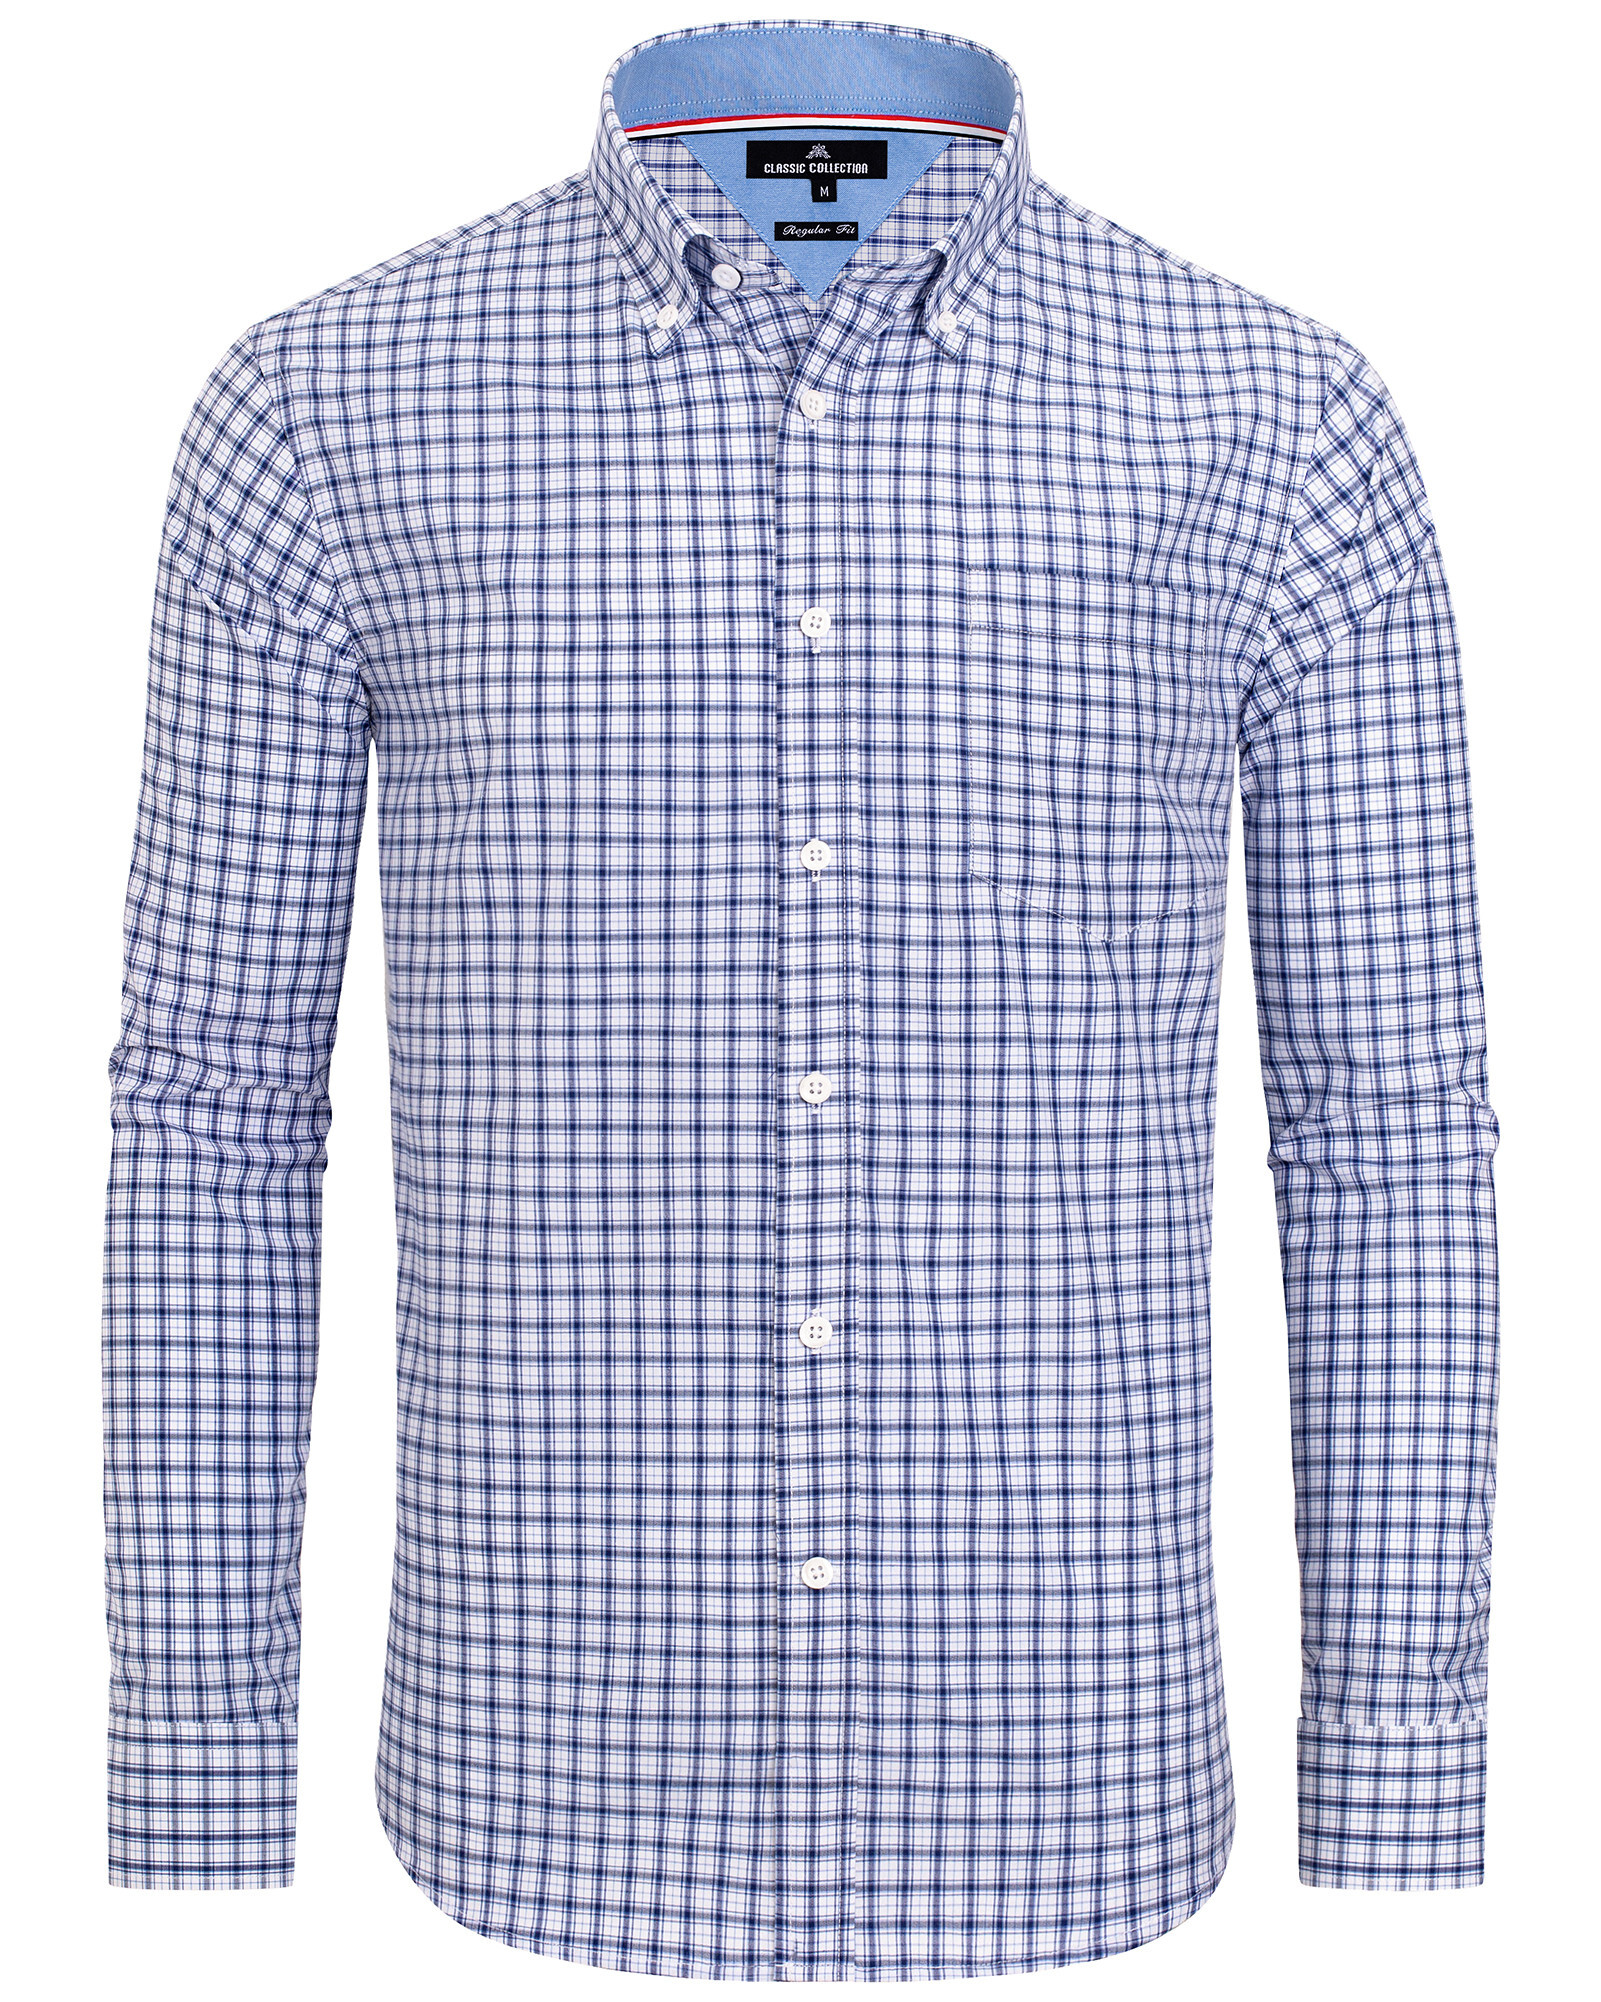 Spring cotton and linen long-sleeved shirts for men, button-down shirts ...